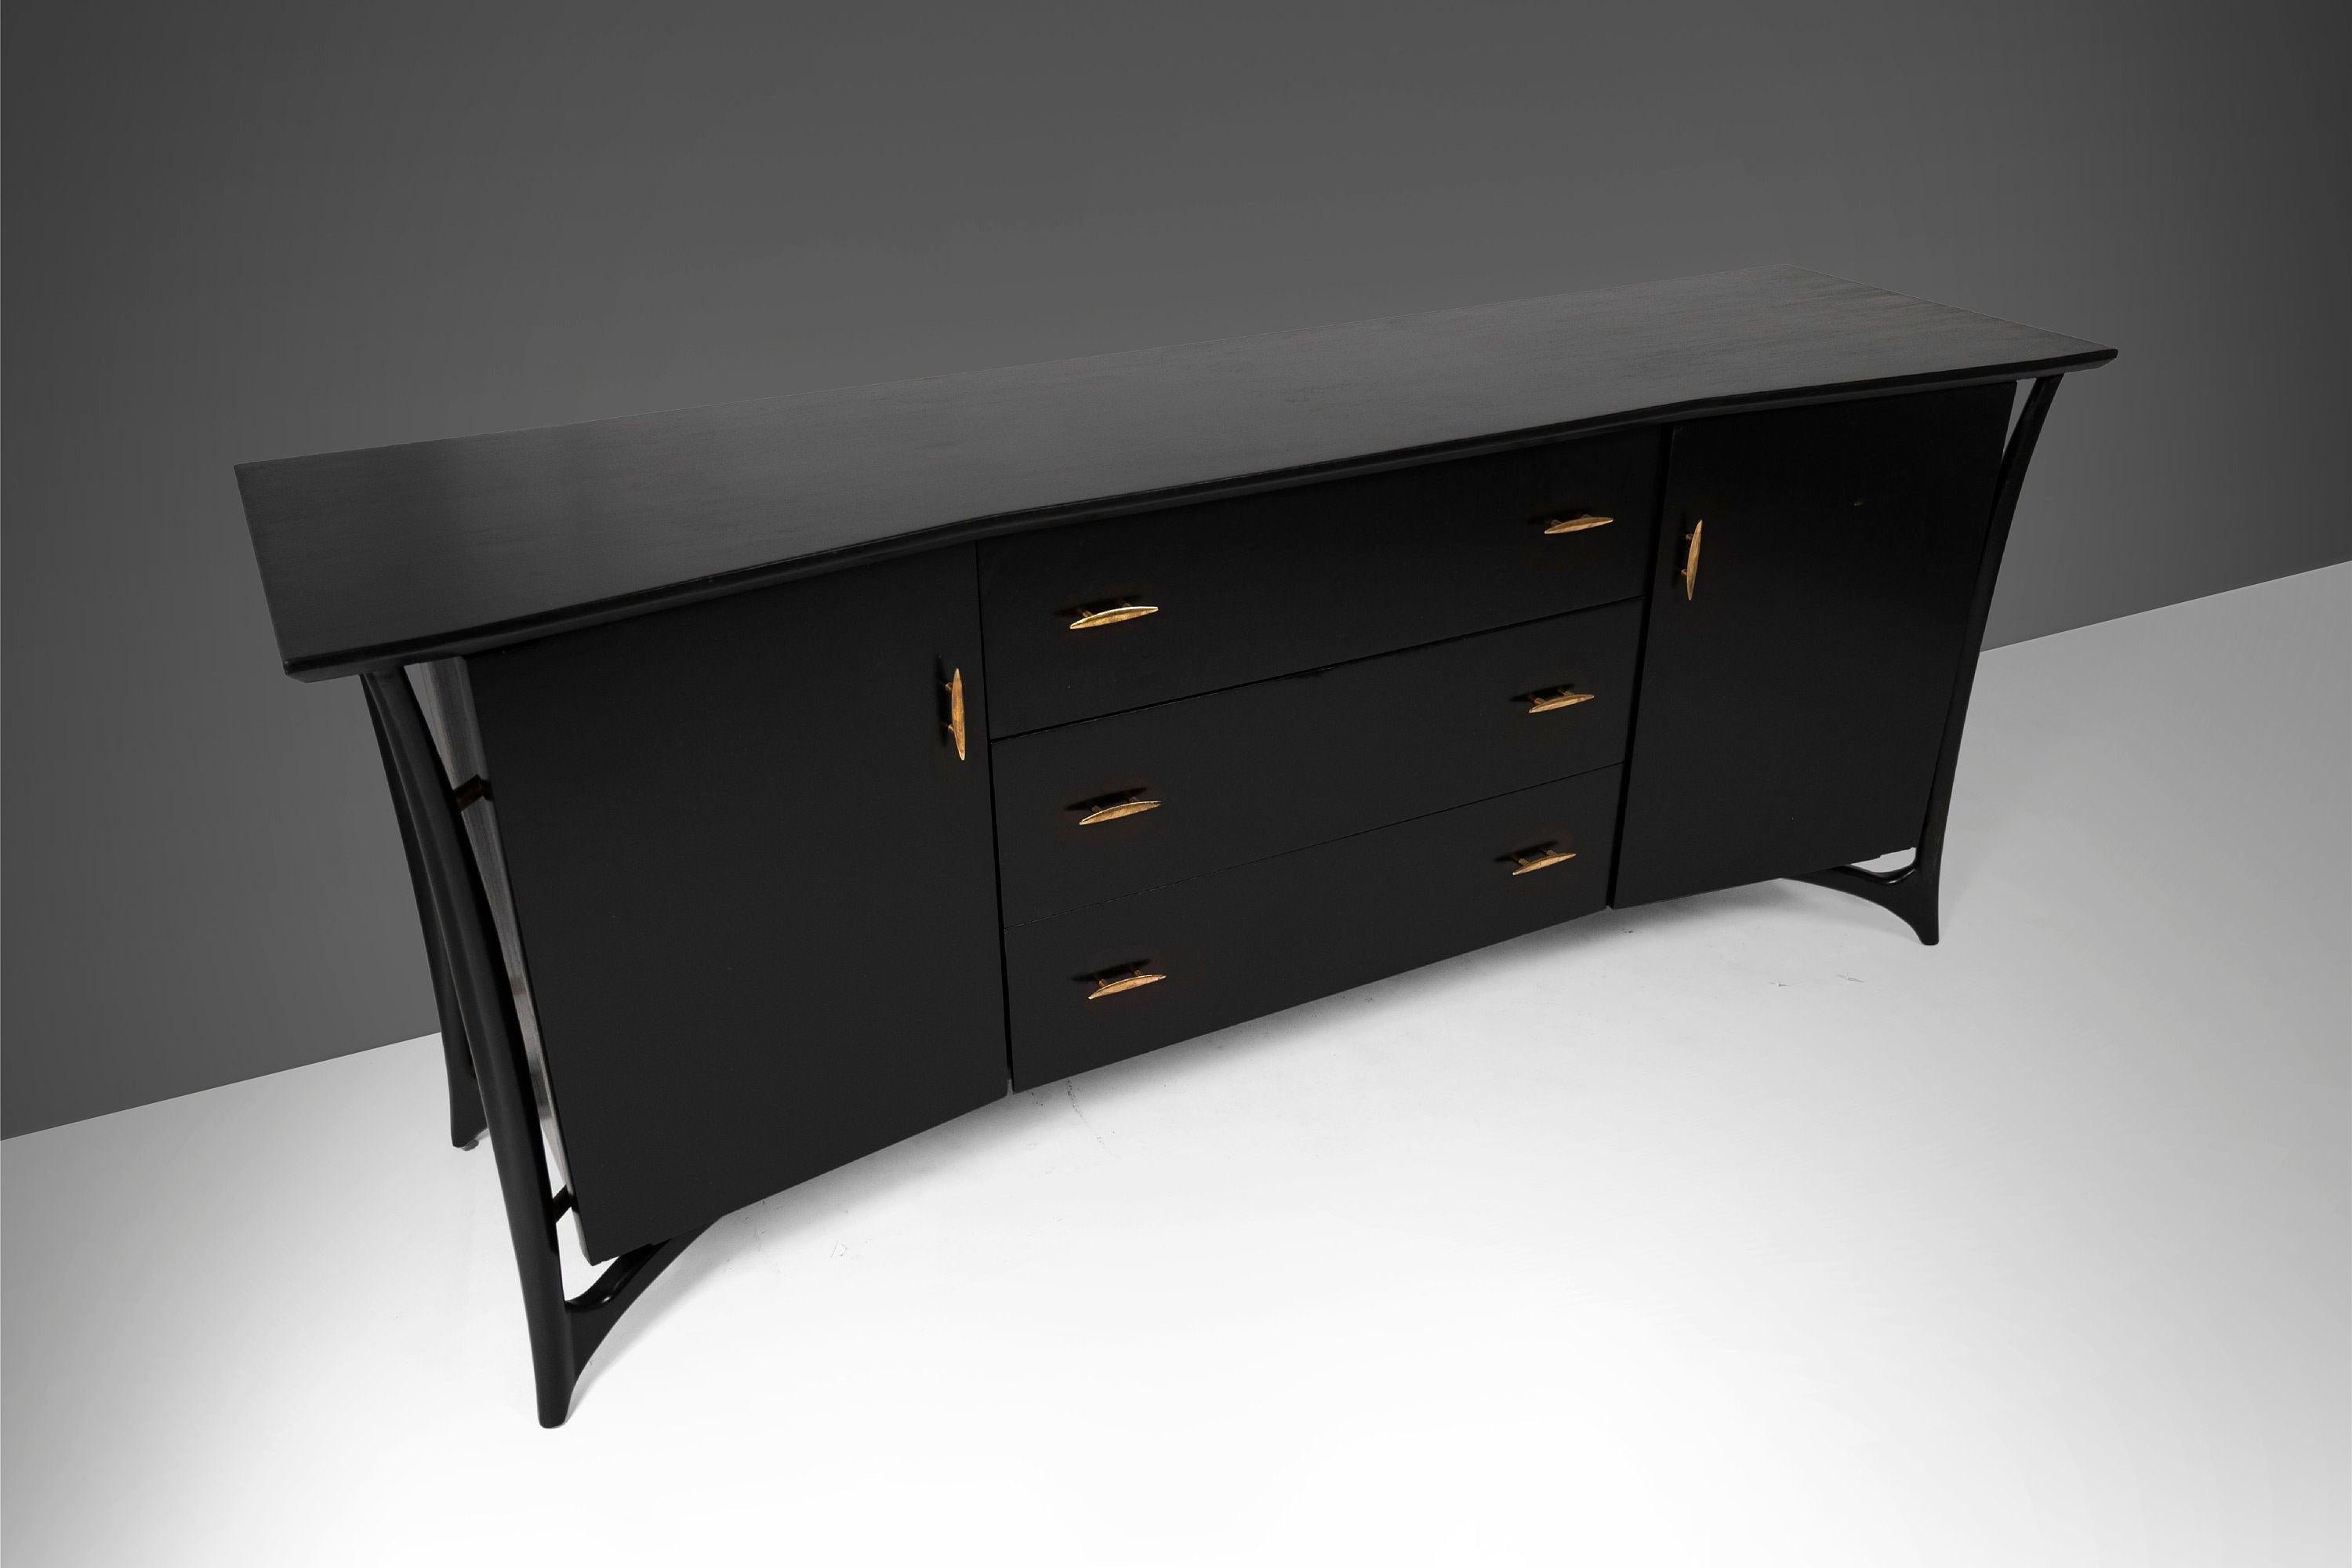 An exceptional architectural build. Designed by Piet Hein and retailed exclusively for Daniel Jones, NYC. This c. 1960 nine drawer dresser has been newly ebonized. The base is set on a sculpted architectural base. Behind the left and right facing